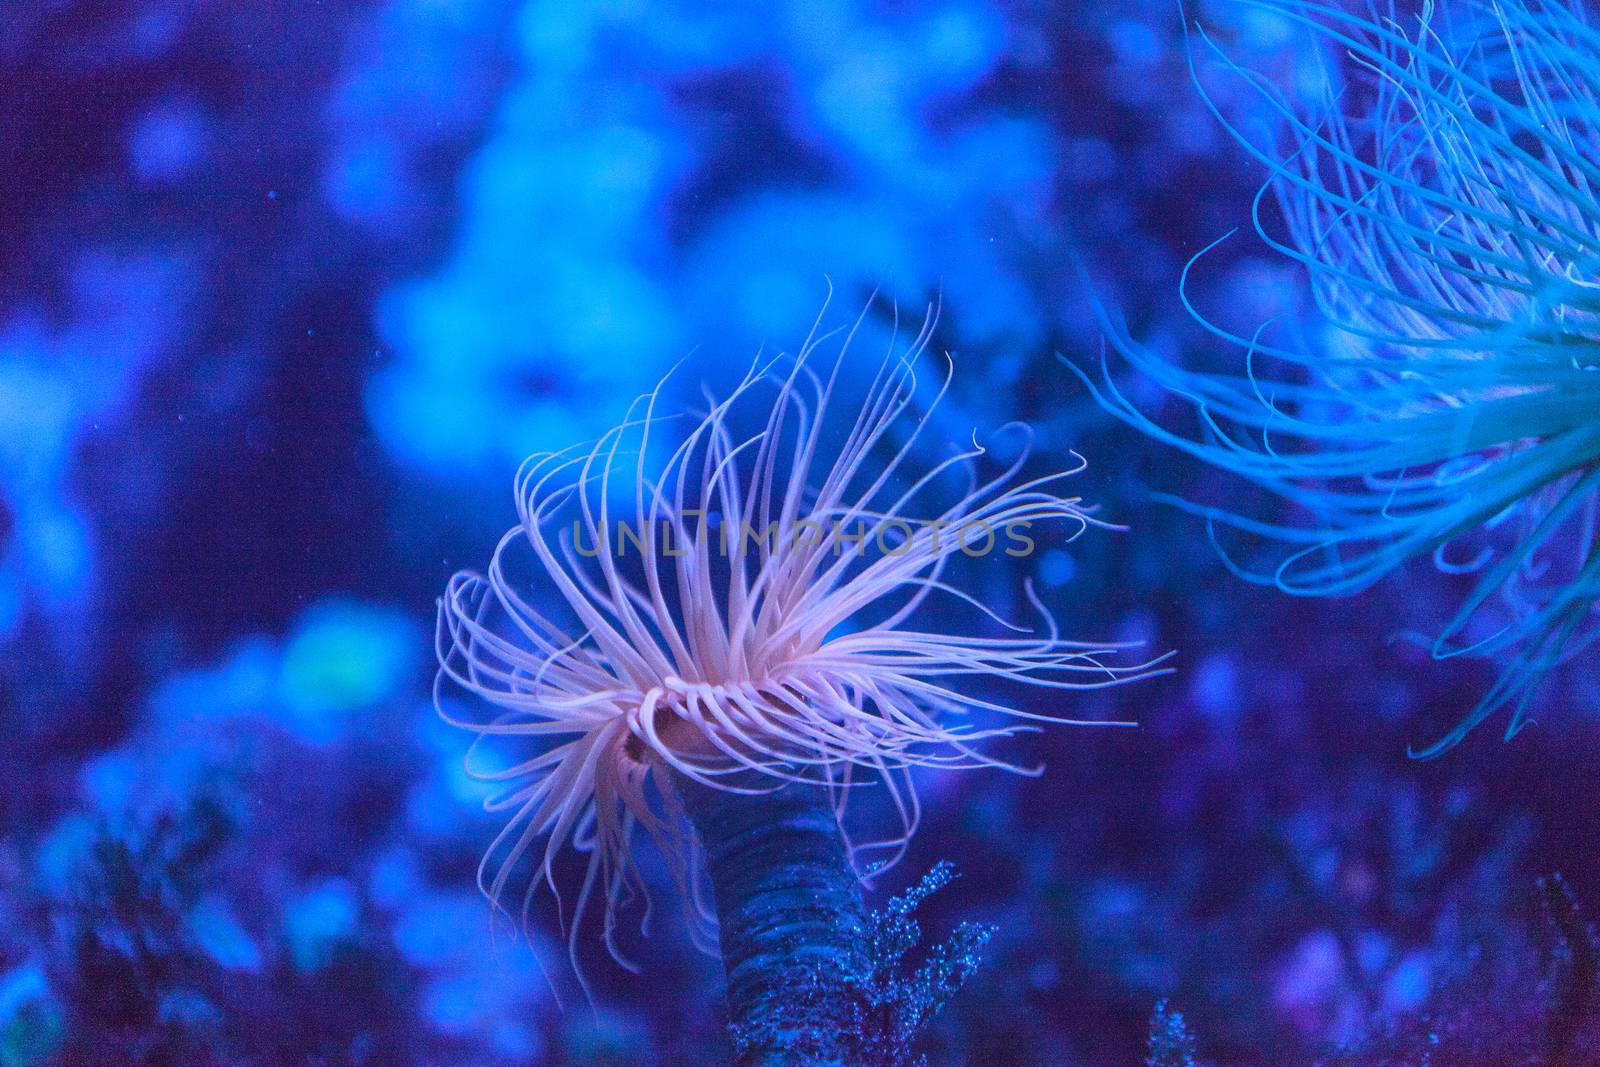 Tube anemone, Pachycerianthus fimbriatus, extends tentacles on the ocean floor.